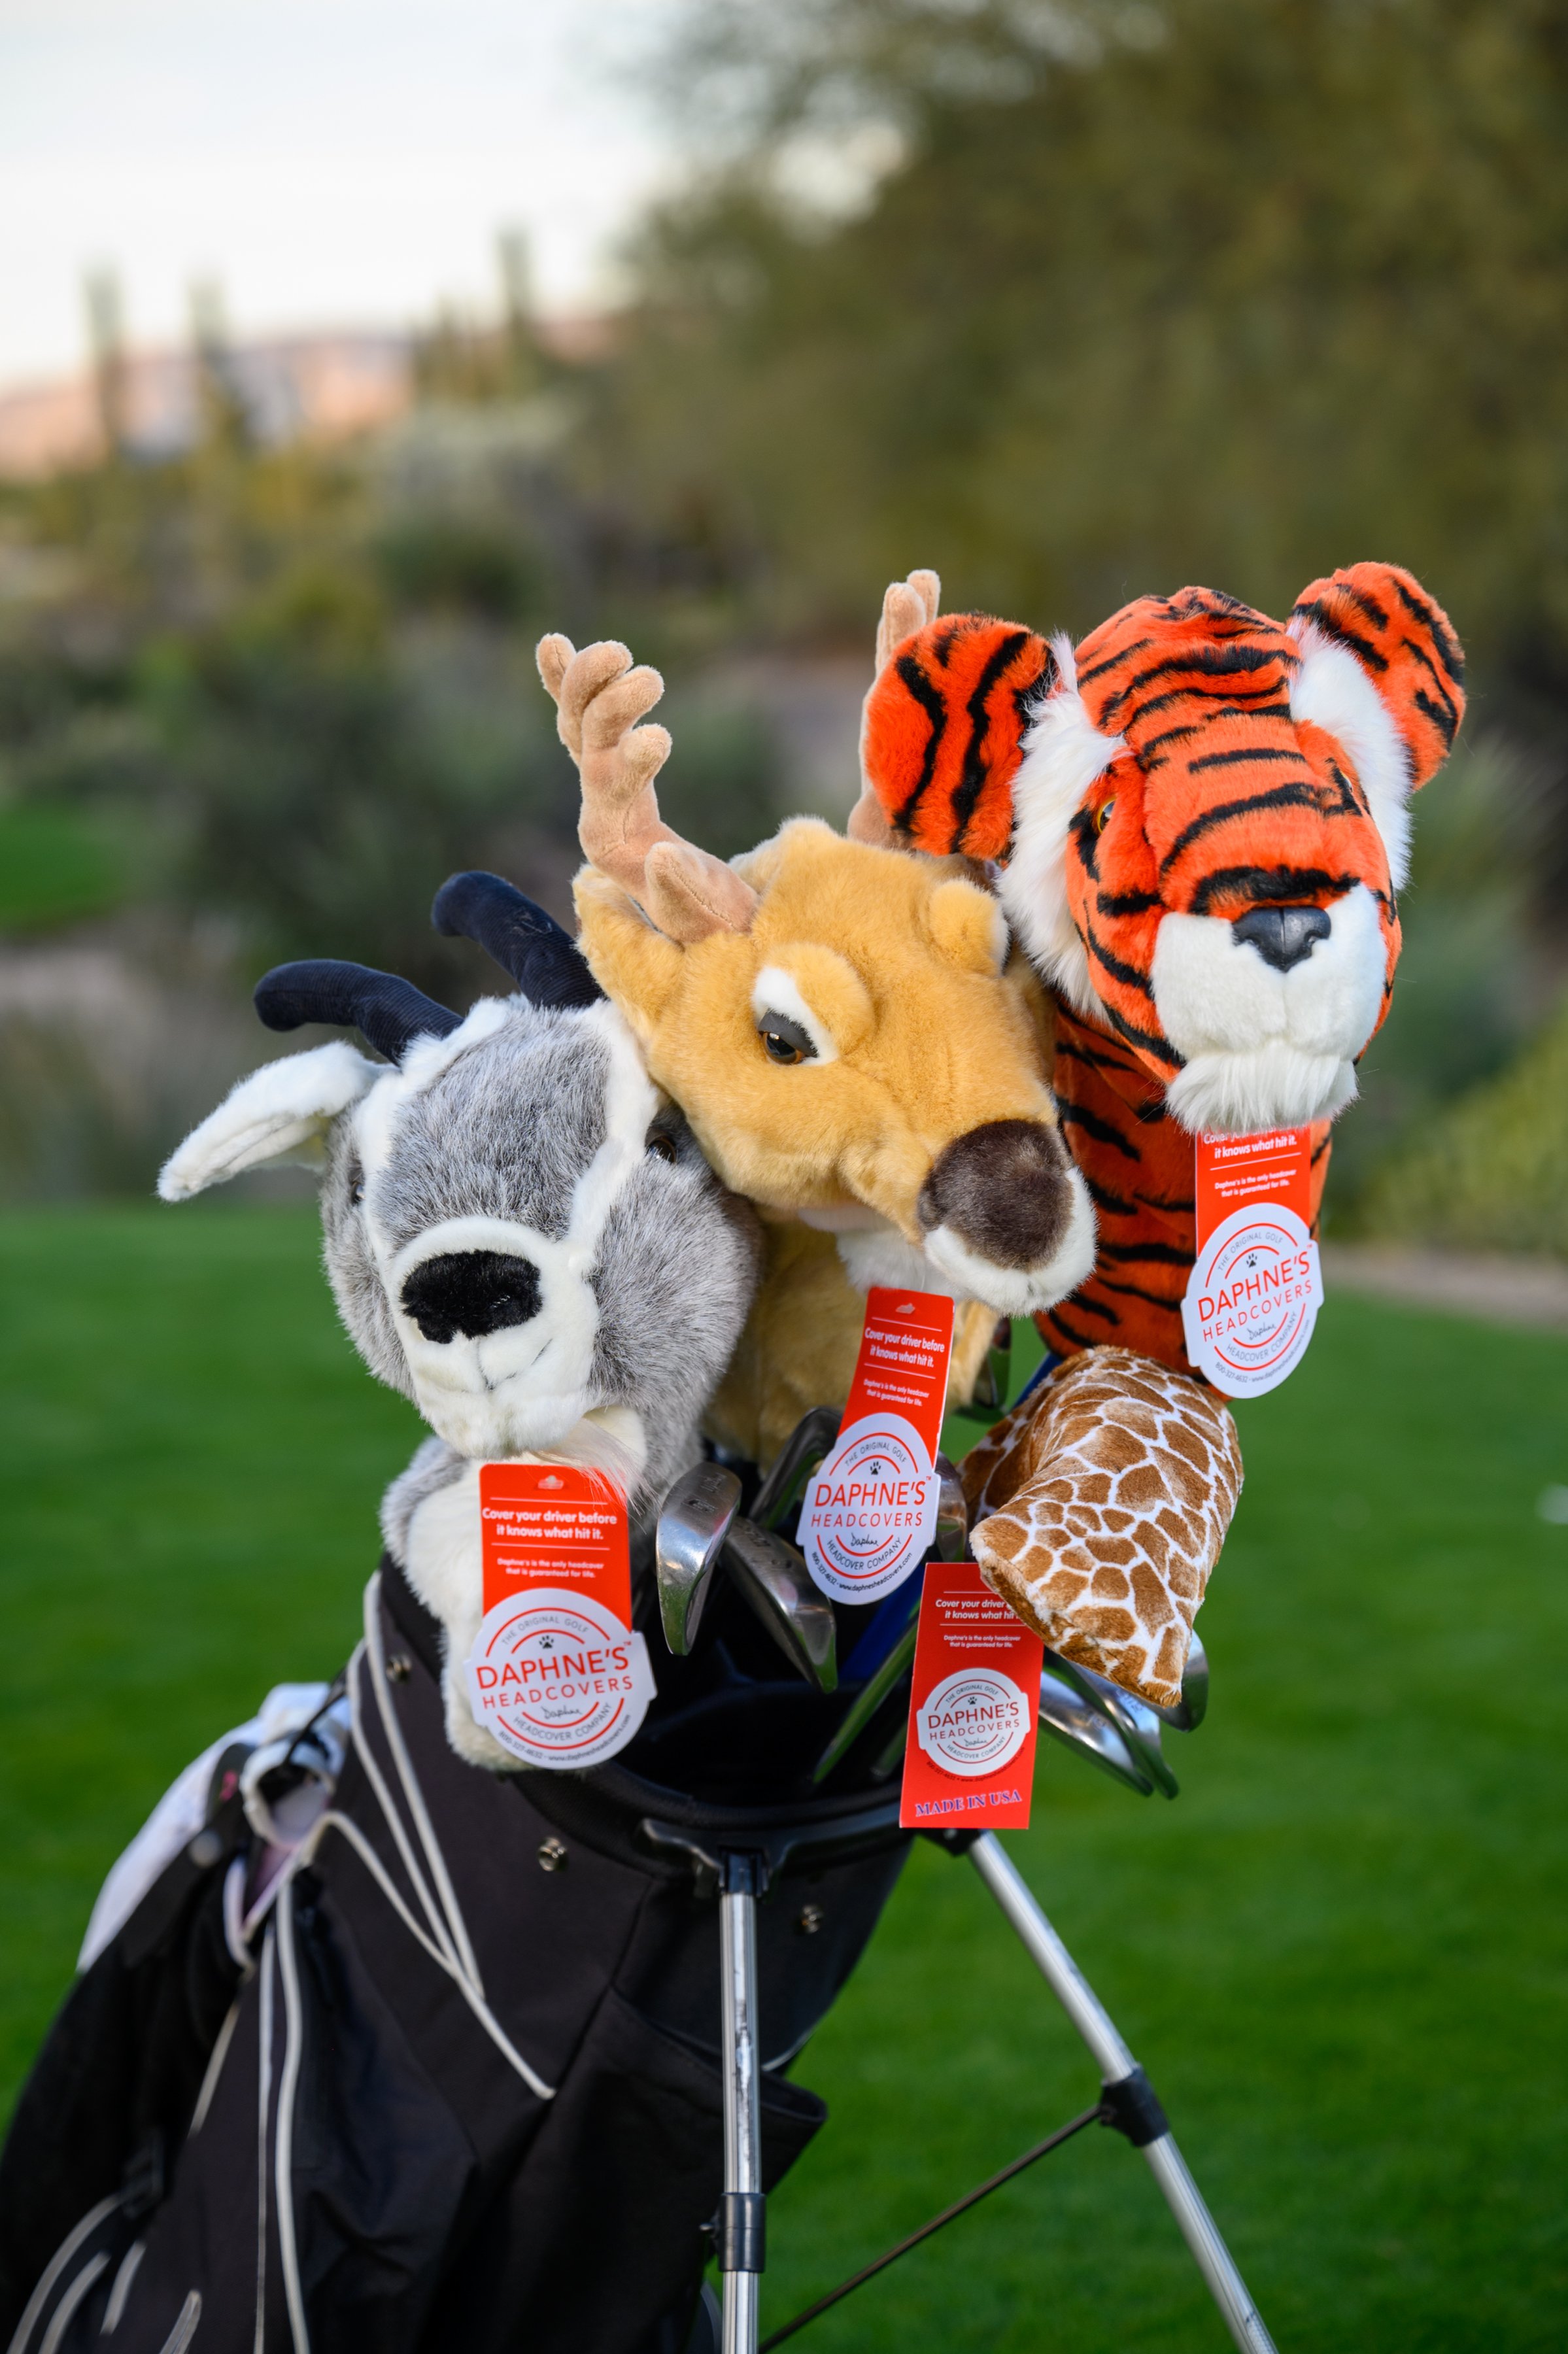 Daphne's Headcovers Tiger Headcover